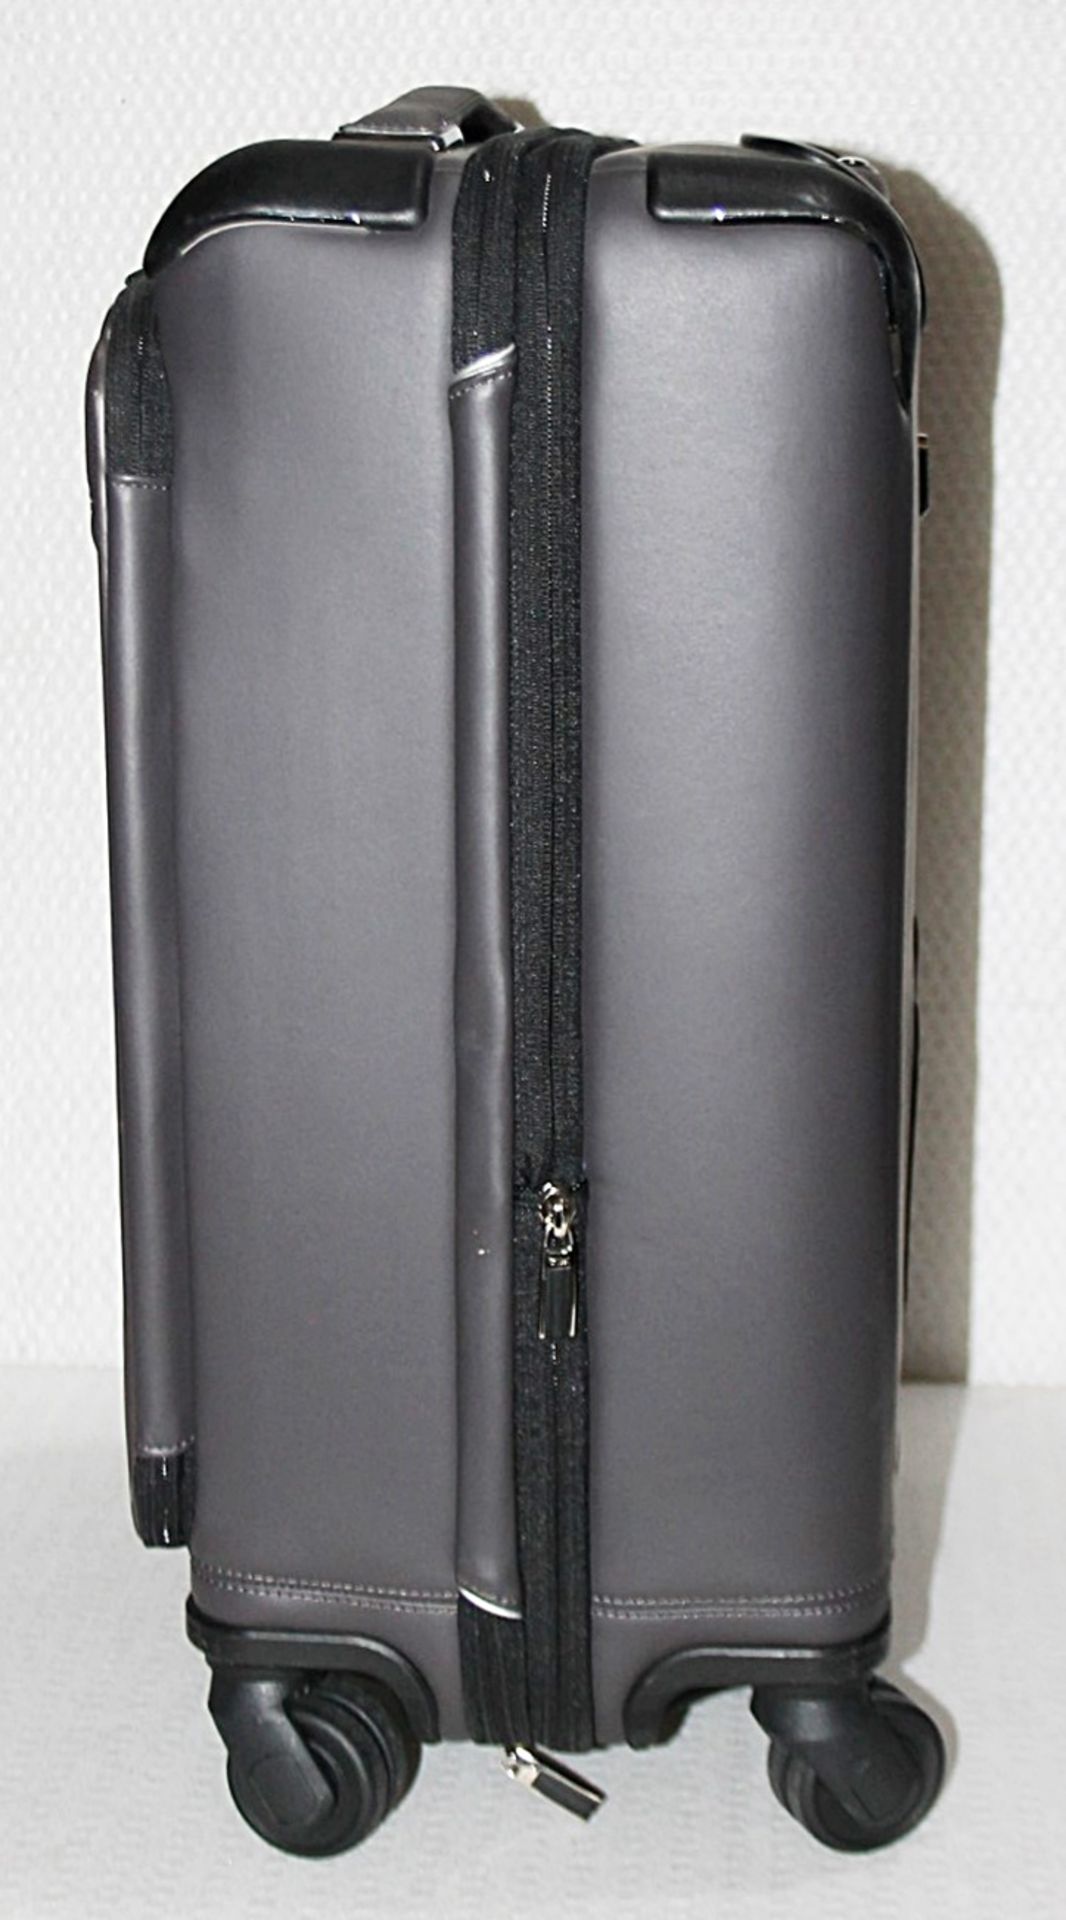 1 x TUMI Luxury Leather Travel Carry-On Case With Telescoping Handle In A Taupe / Gunmetal Grey - Image 10 of 24